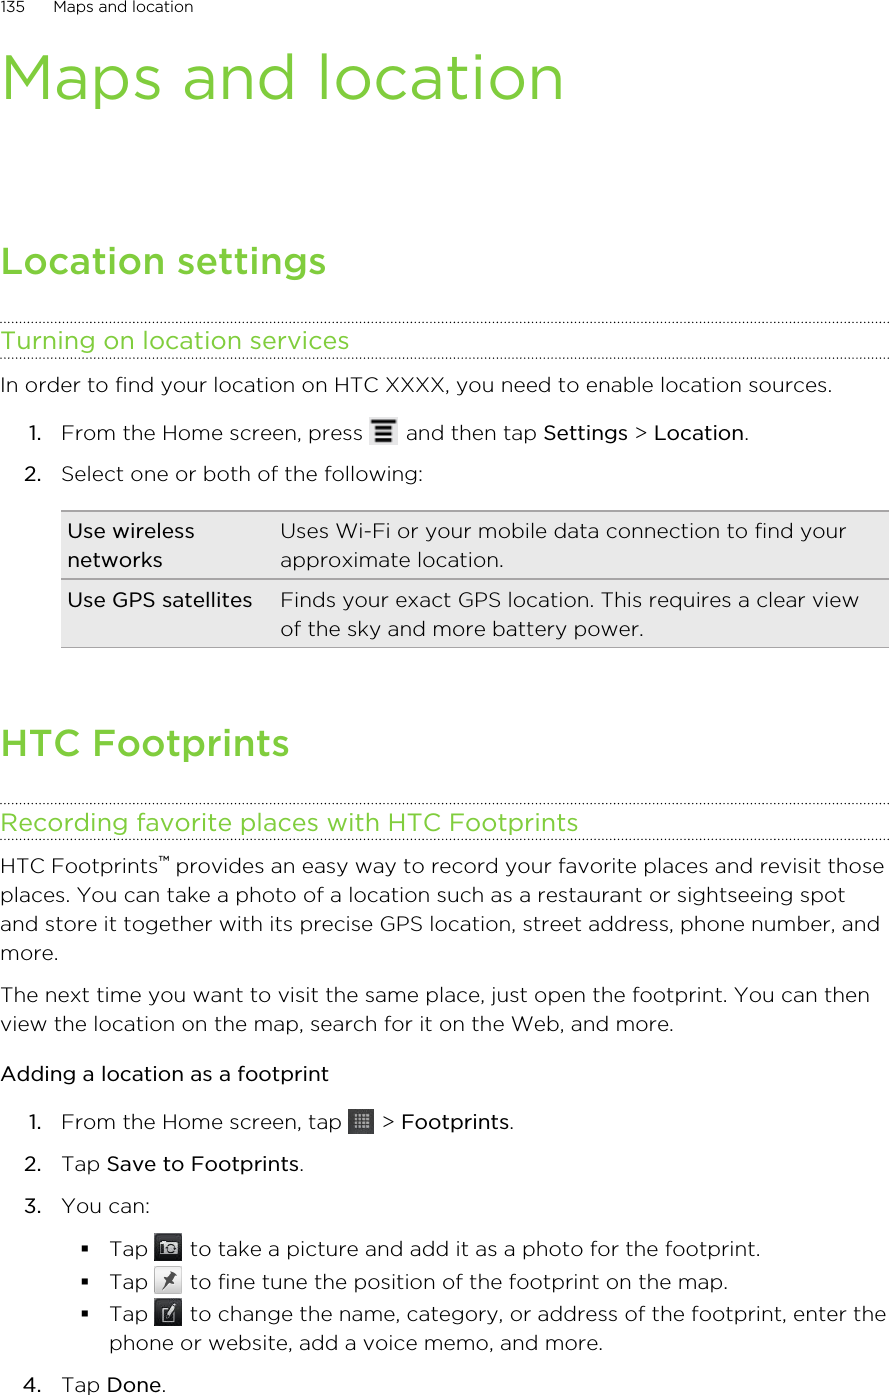 Maps and locationLocation settingsTurning on location servicesIn order to find your location on HTC XXXX, you need to enable location sources.1. From the Home screen, press   and then tap Settings &gt; Location.2. Select one or both of the following:Use wirelessnetworksUses Wi-Fi or your mobile data connection to find yourapproximate location.Use GPS satellites Finds your exact GPS location. This requires a clear viewof the sky and more battery power.HTC FootprintsRecording favorite places with HTC FootprintsHTC Footprints™ provides an easy way to record your favorite places and revisit thoseplaces. You can take a photo of a location such as a restaurant or sightseeing spotand store it together with its precise GPS location, street address, phone number, andmore.The next time you want to visit the same place, just open the footprint. You can thenview the location on the map, search for it on the Web, and more.Adding a location as a footprint1. From the Home screen, tap   &gt; Footprints.2. Tap Save to Footprints.3. You can:§Tap   to take a picture and add it as a photo for the footprint.§Tap   to fine tune the position of the footprint on the map.§Tap   to change the name, category, or address of the footprint, enter thephone or website, add a voice memo, and more.4. Tap Done.135 Maps and location